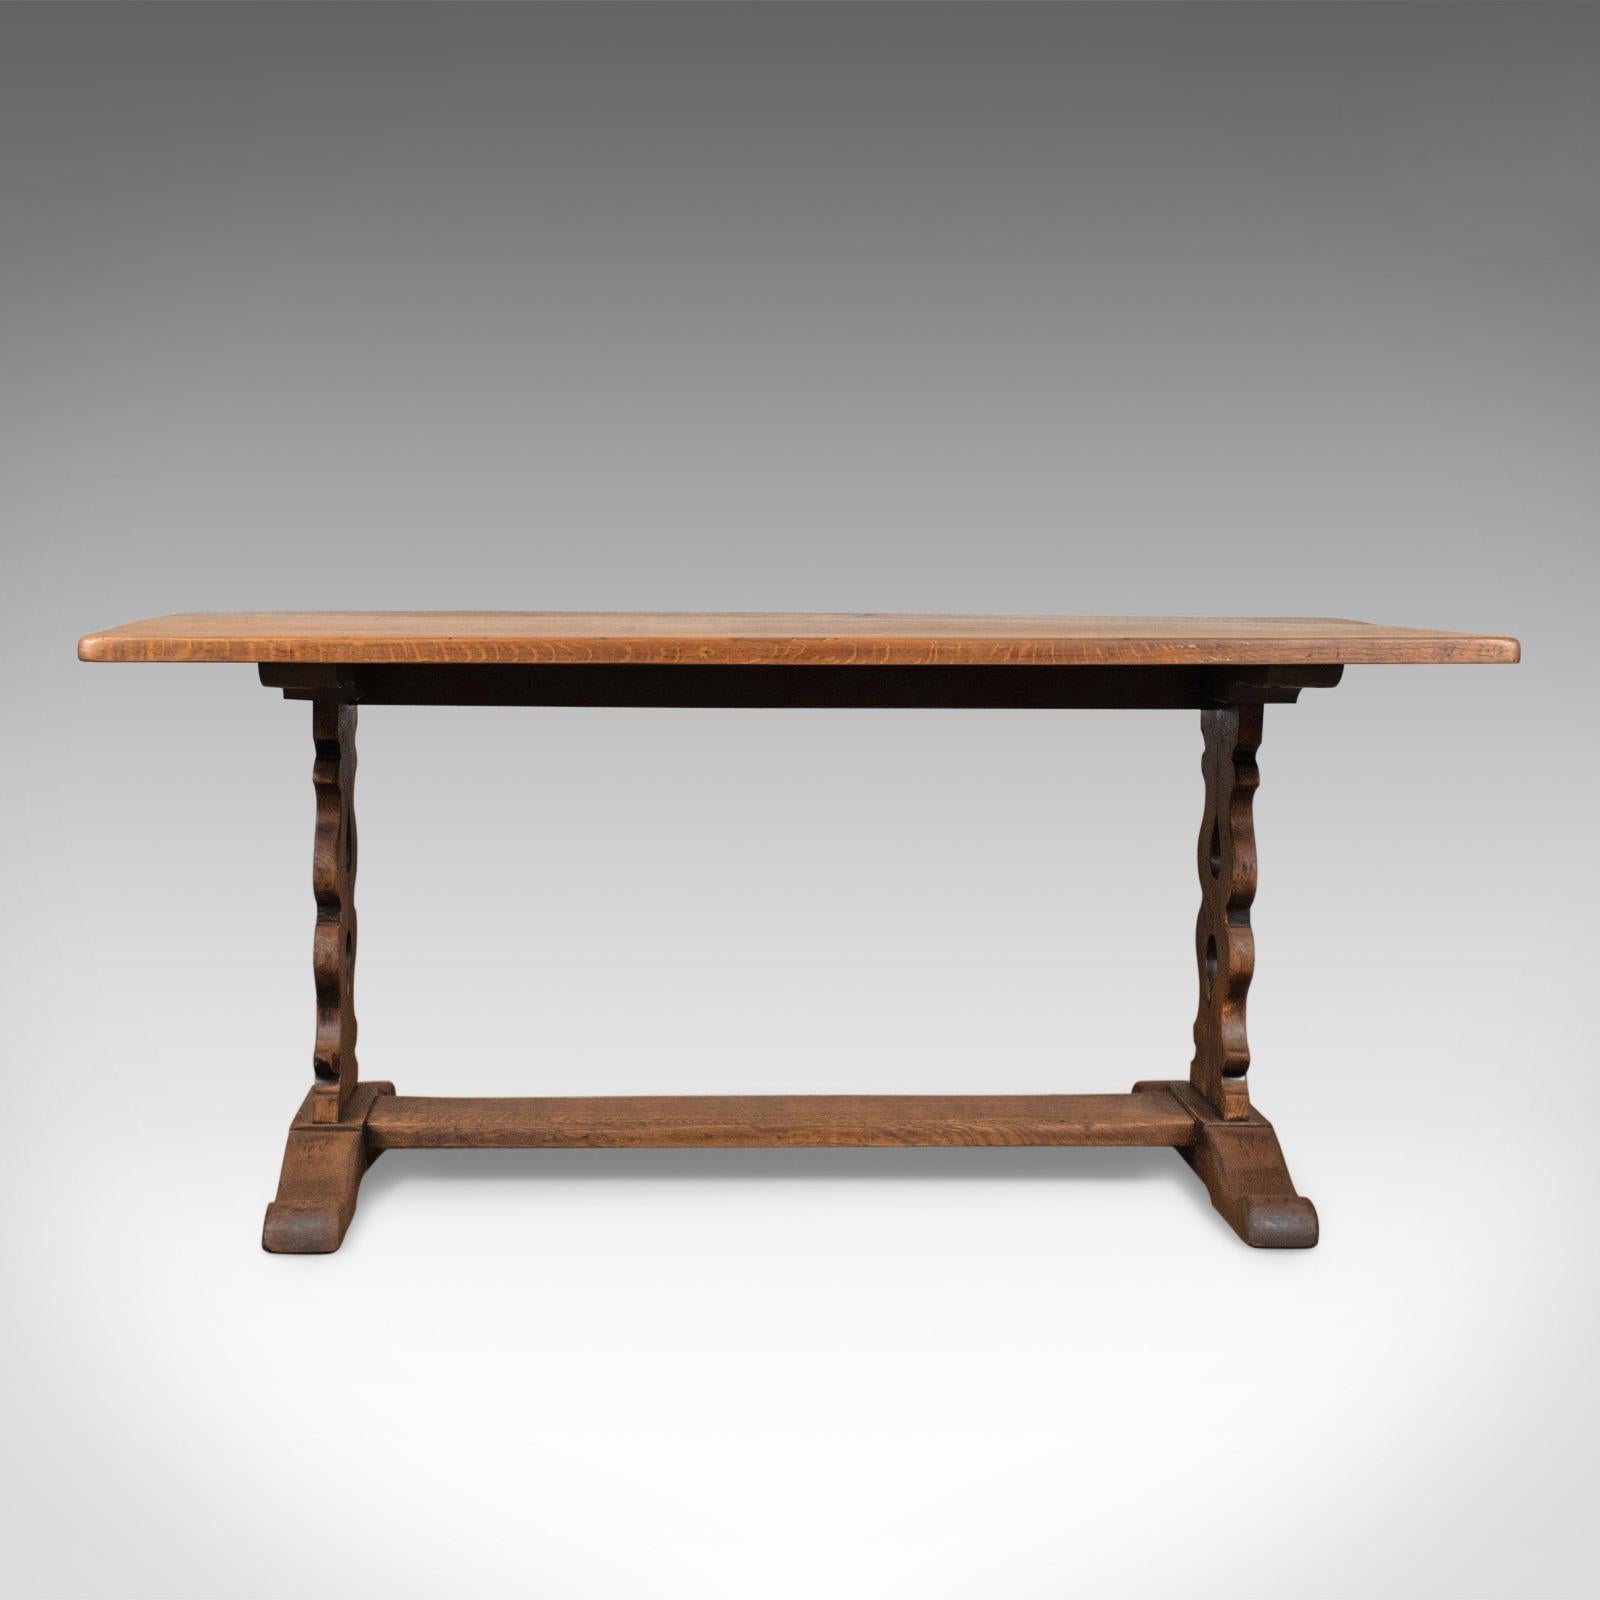 This is an antique refectory table, an Edwardian, Jacobean revival, oak dining table seating six, dating to the early 20th century, circa 1910.

Attractive honey tones to the English oak
Grain interest and a desirable aged patina
Displaying